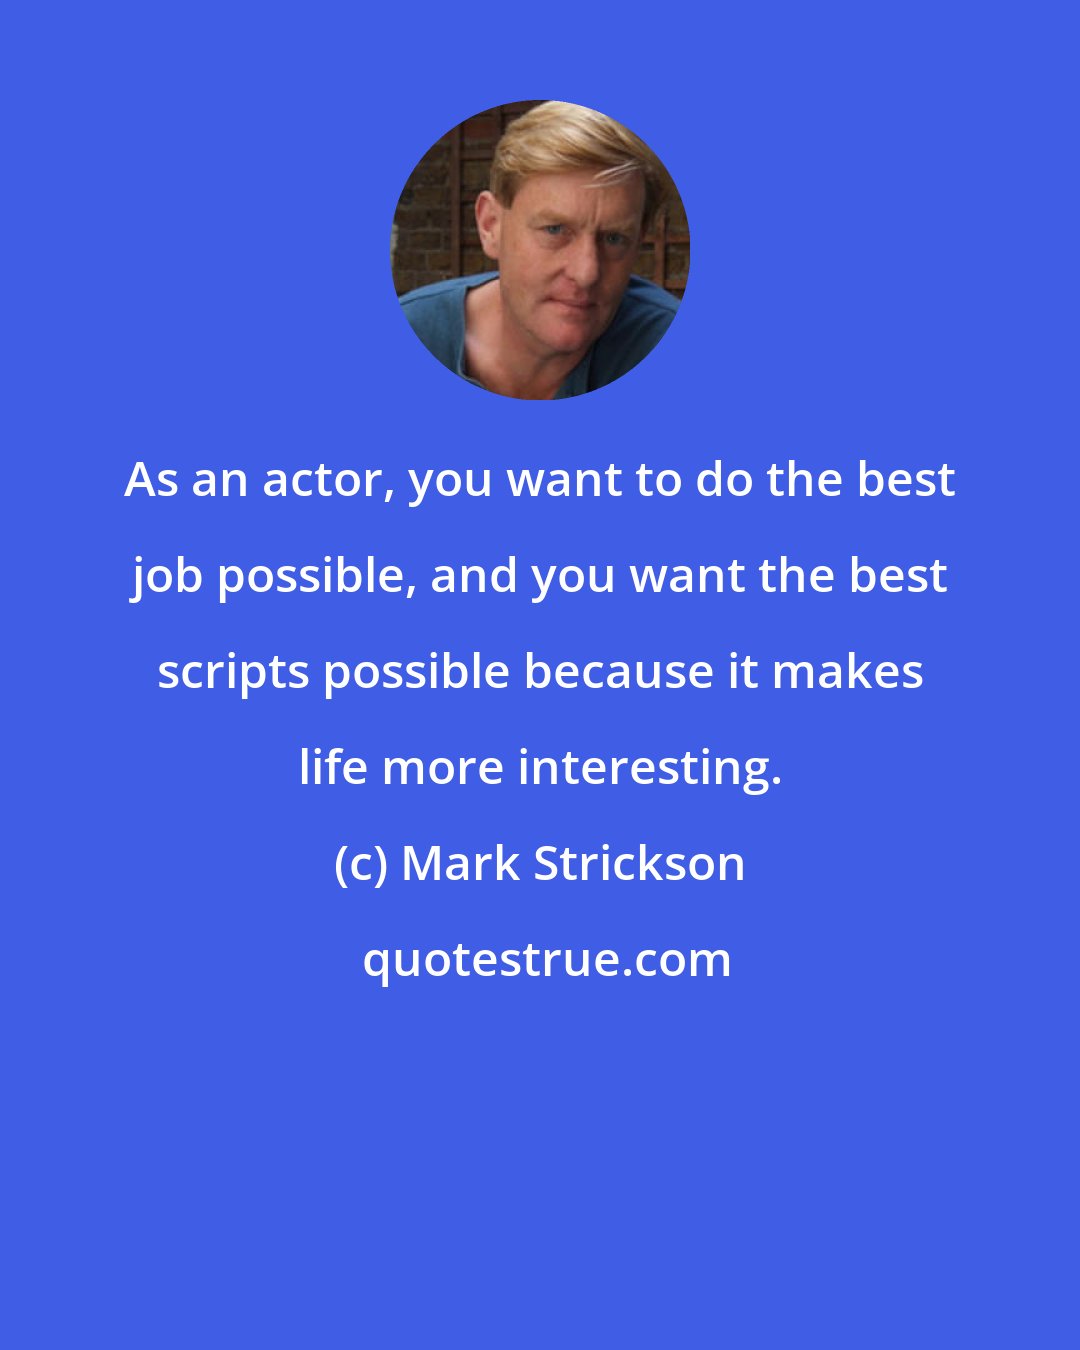 Mark Strickson: As an actor, you want to do the best job possible, and you want the best scripts possible because it makes life more interesting.